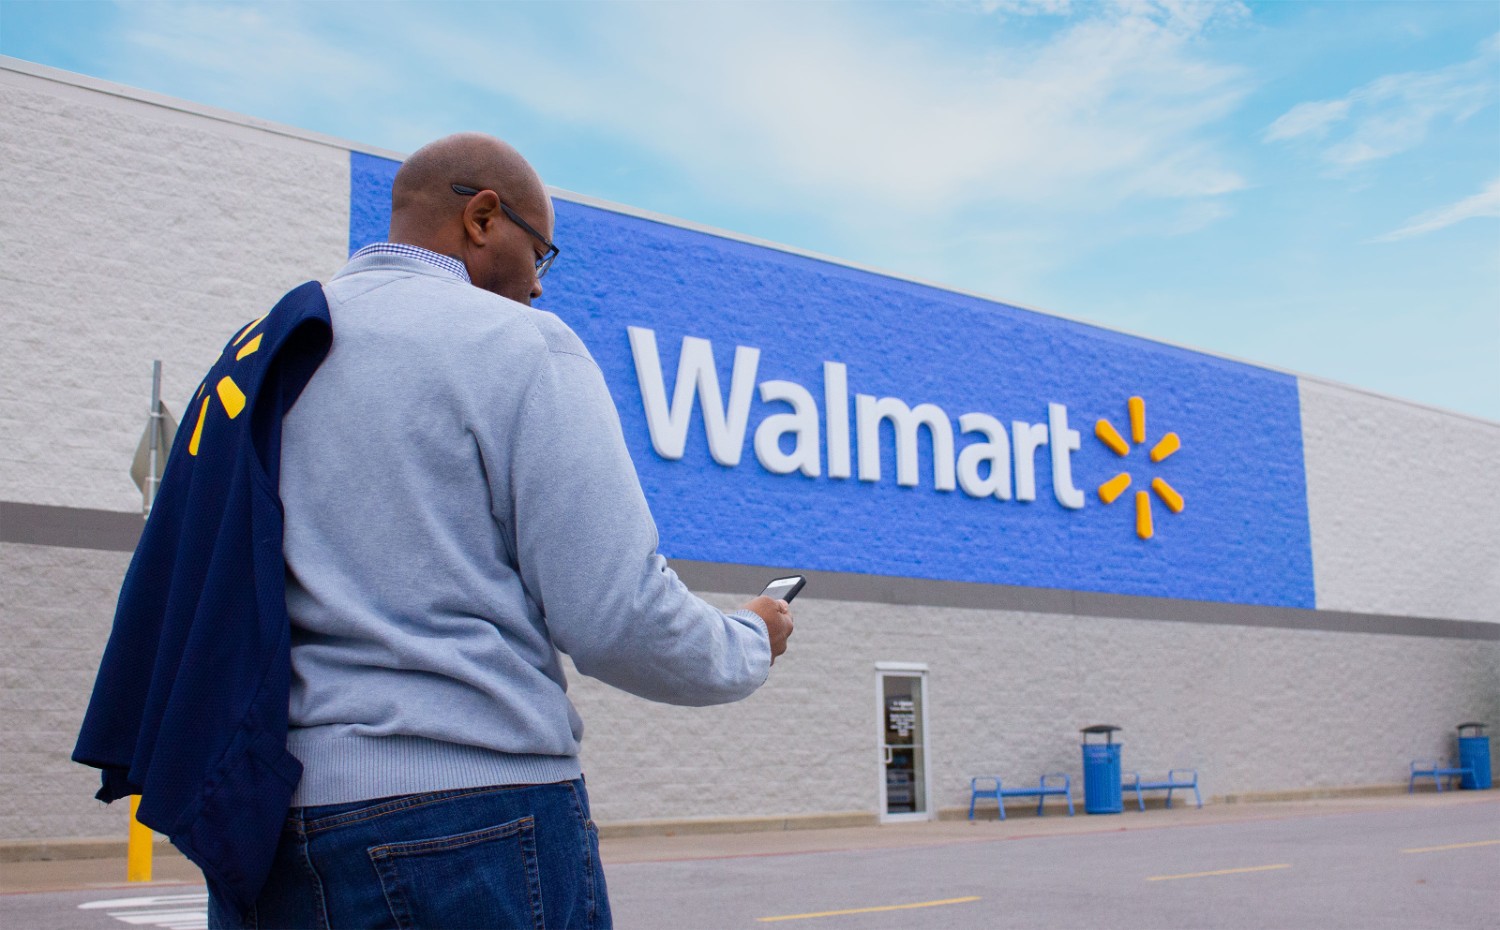 Why Are There No Walmarts in New York City?